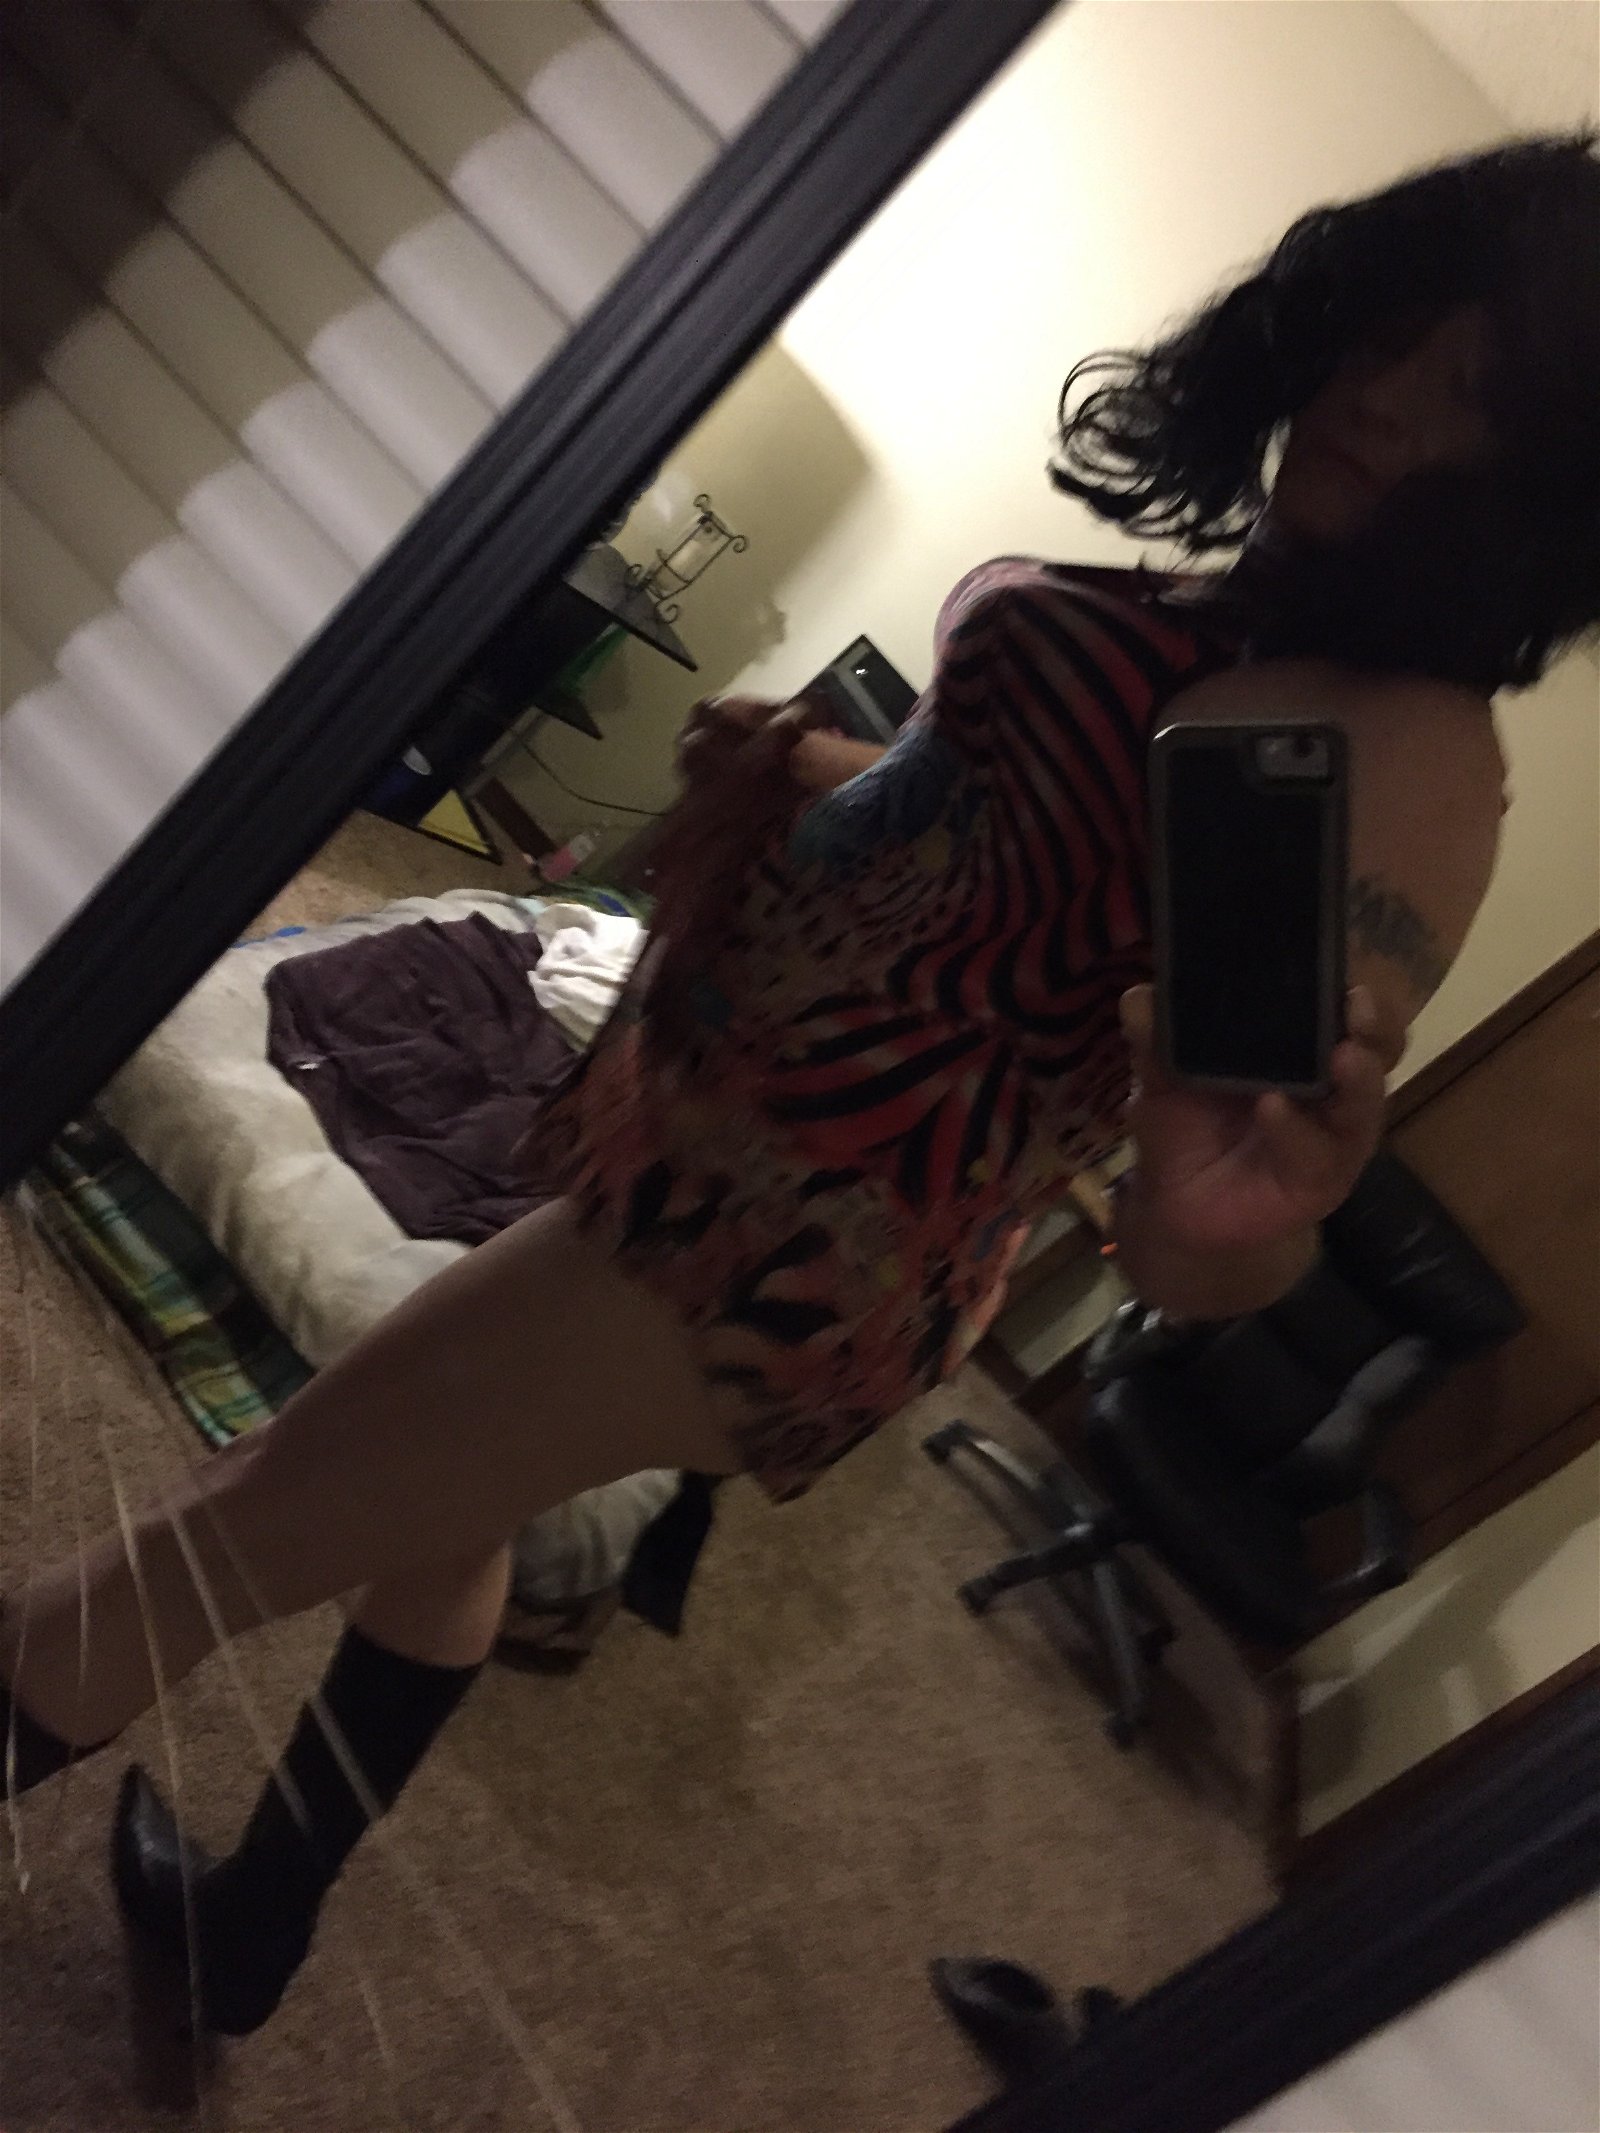 Watch the Photo by Sassycharlene666 with the username @Sassycharlene666t, who is a verified user, posted on January 2, 2021. The post is about the topic Home Made Amateurs.